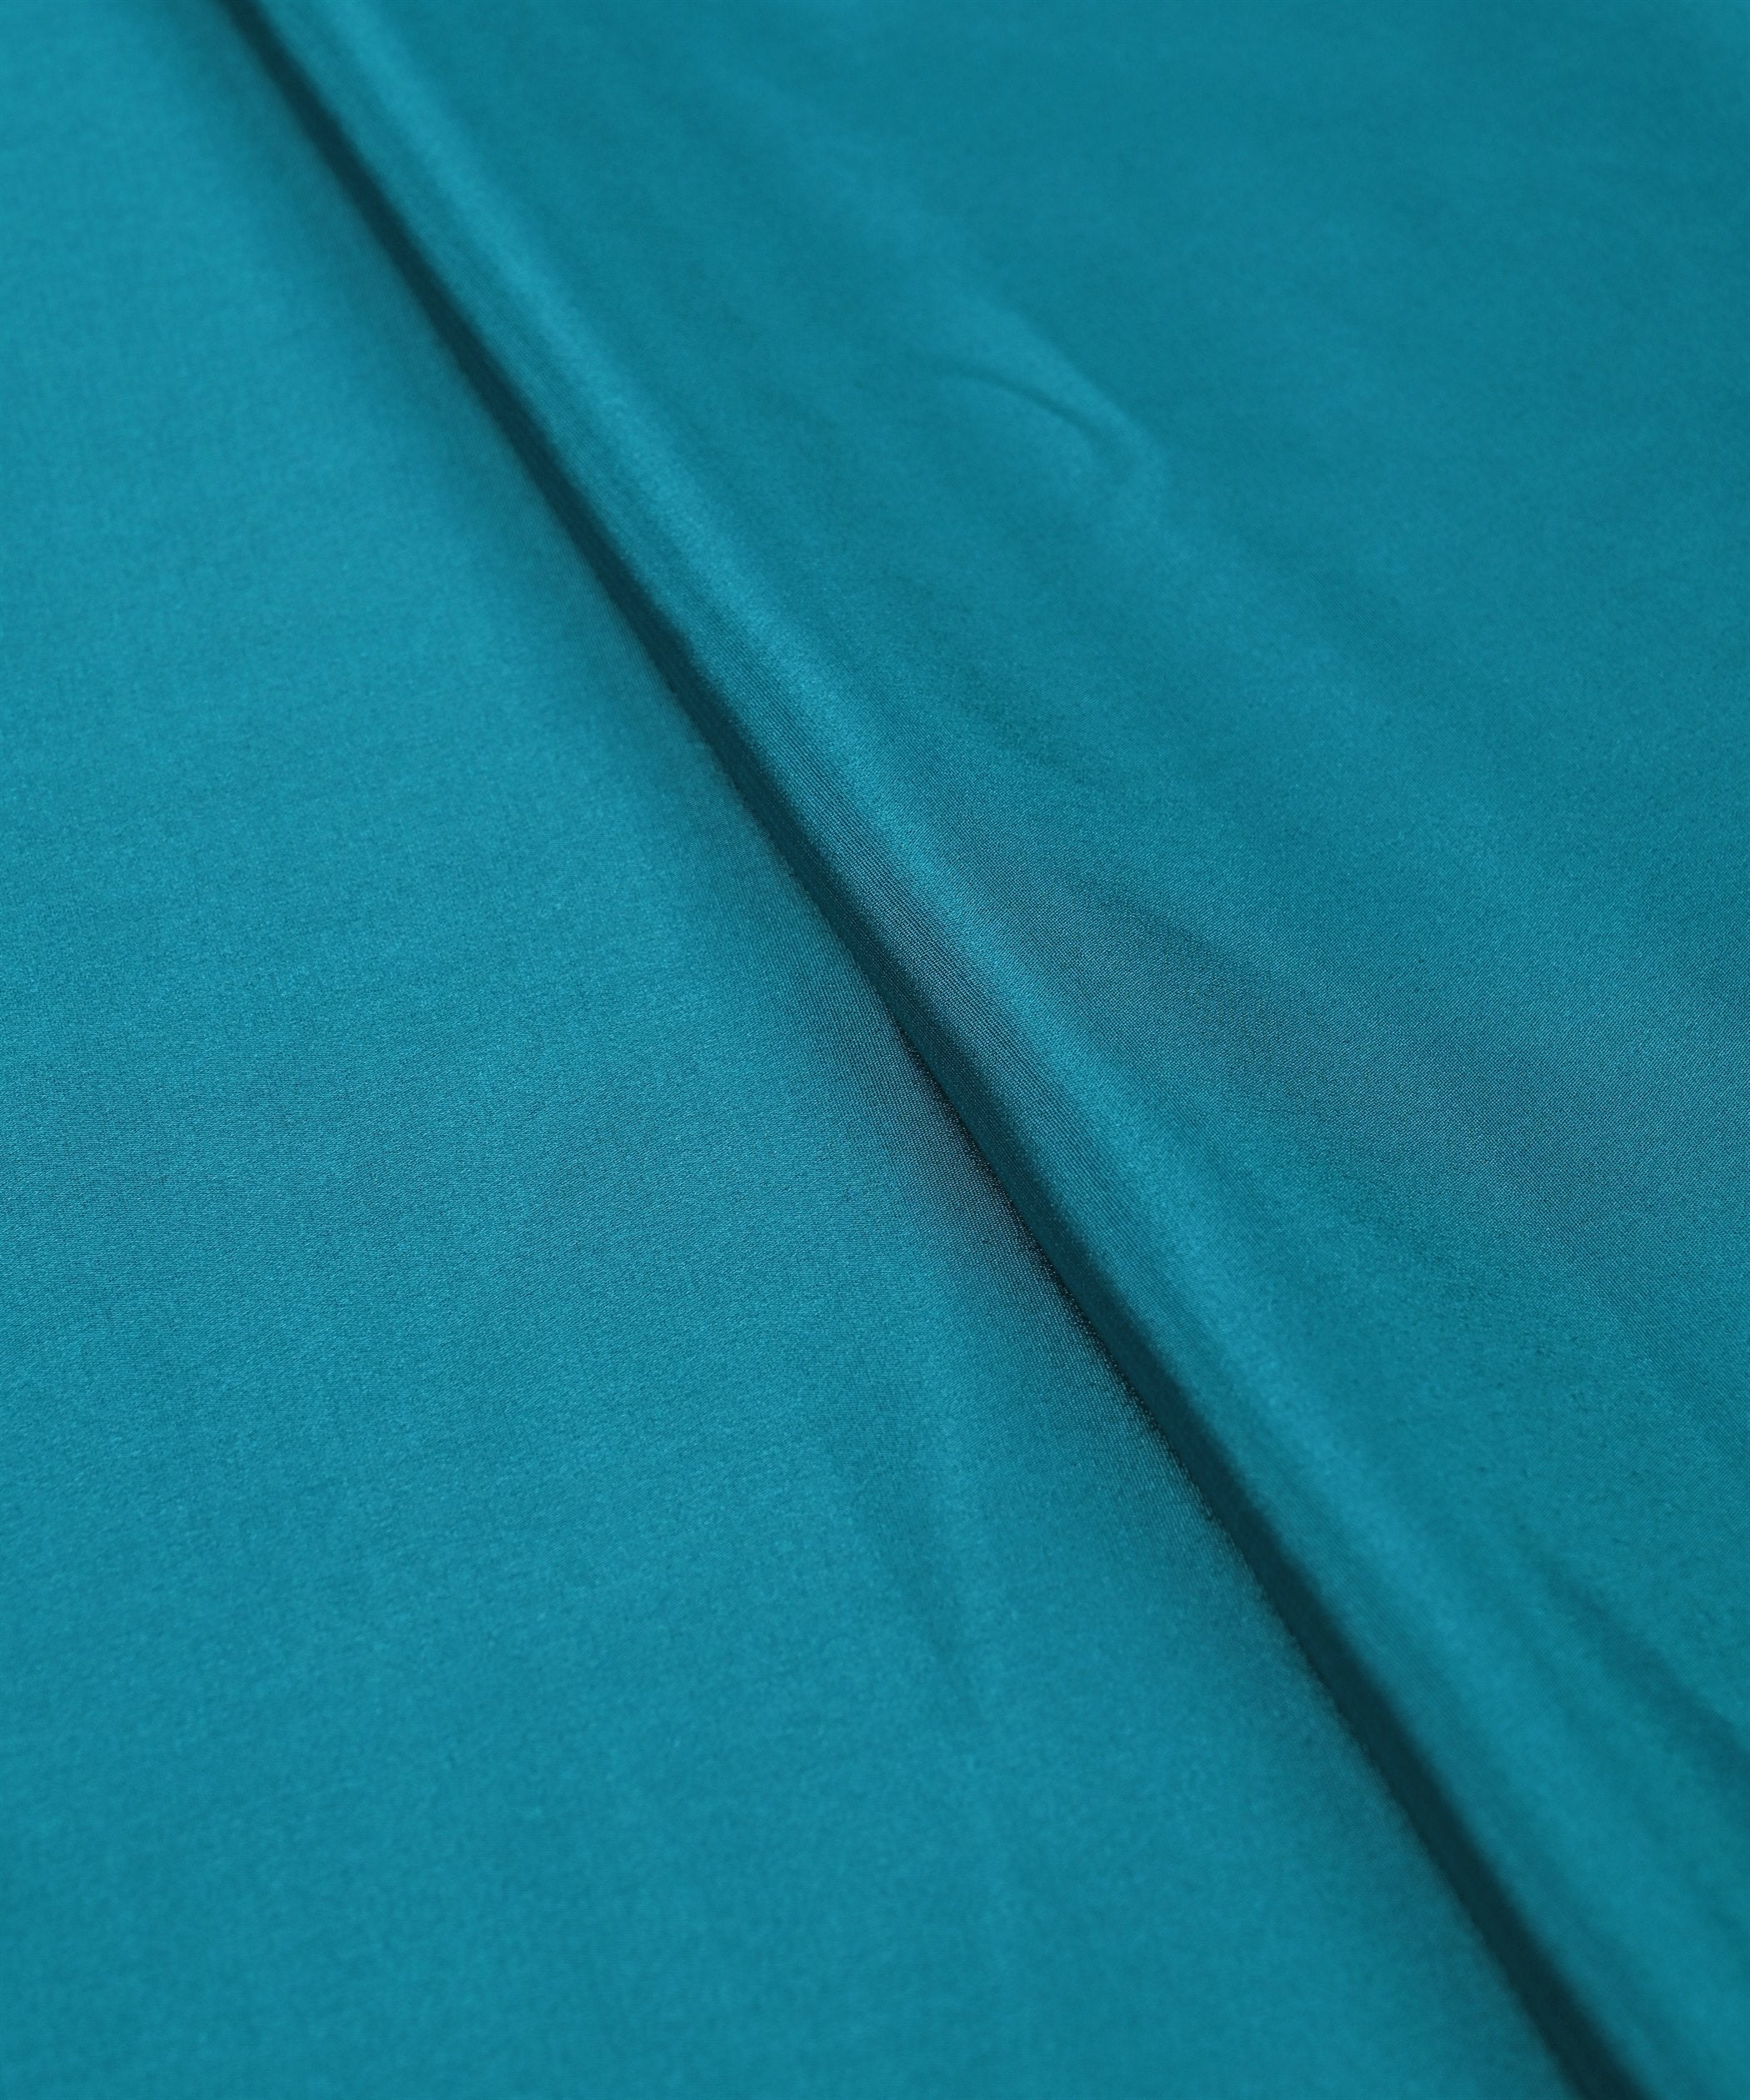 Teal Plain Dyed Crepe Fabric